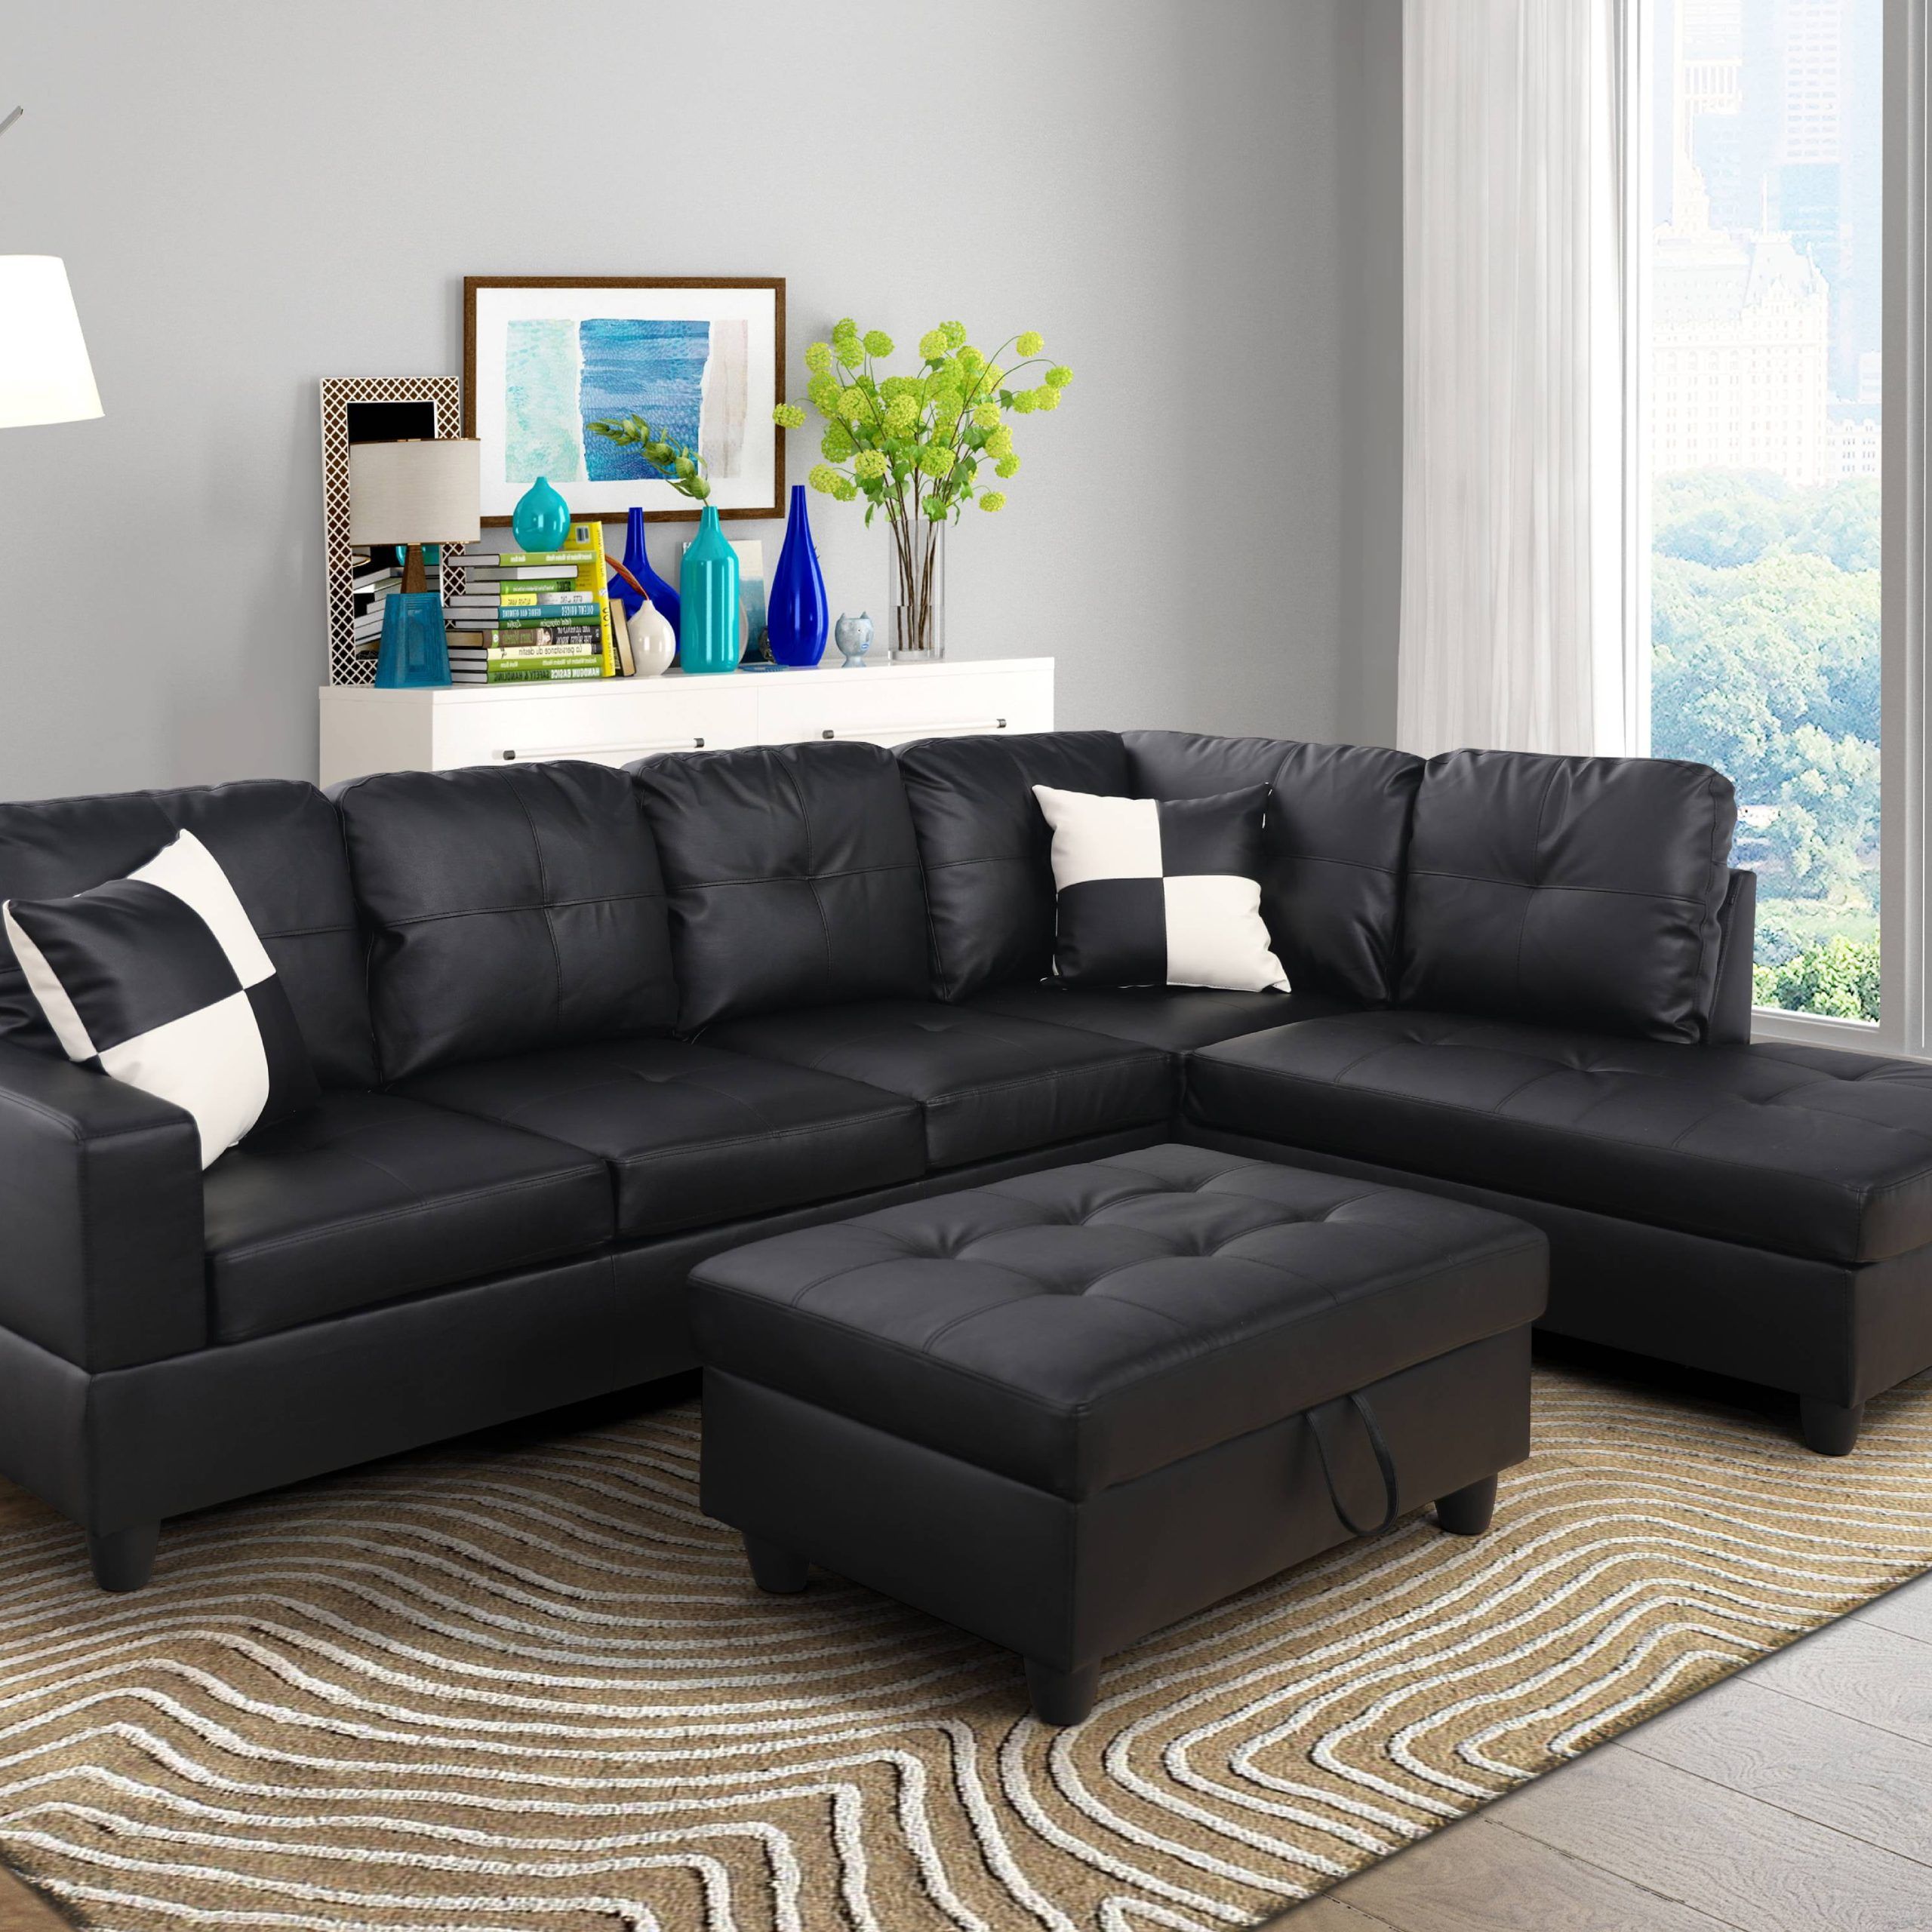 For U Furnishing Classic Black Faux Leather Sectional Sofa, Right Regarding Sofas In Black (View 15 of 20)